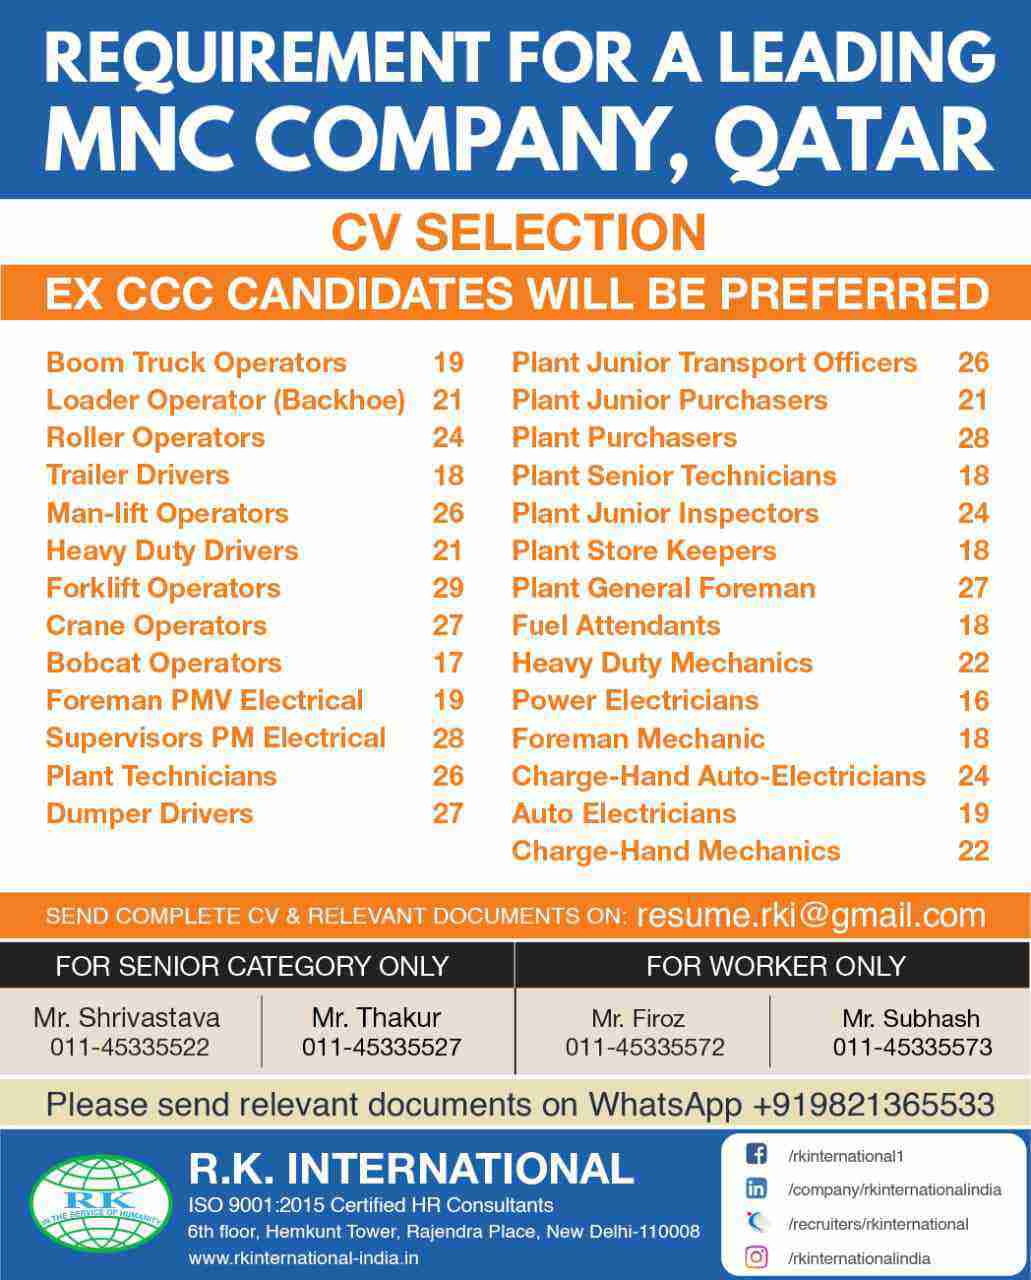 Gulf Job Vacancy Required for a leading Company in Qatar